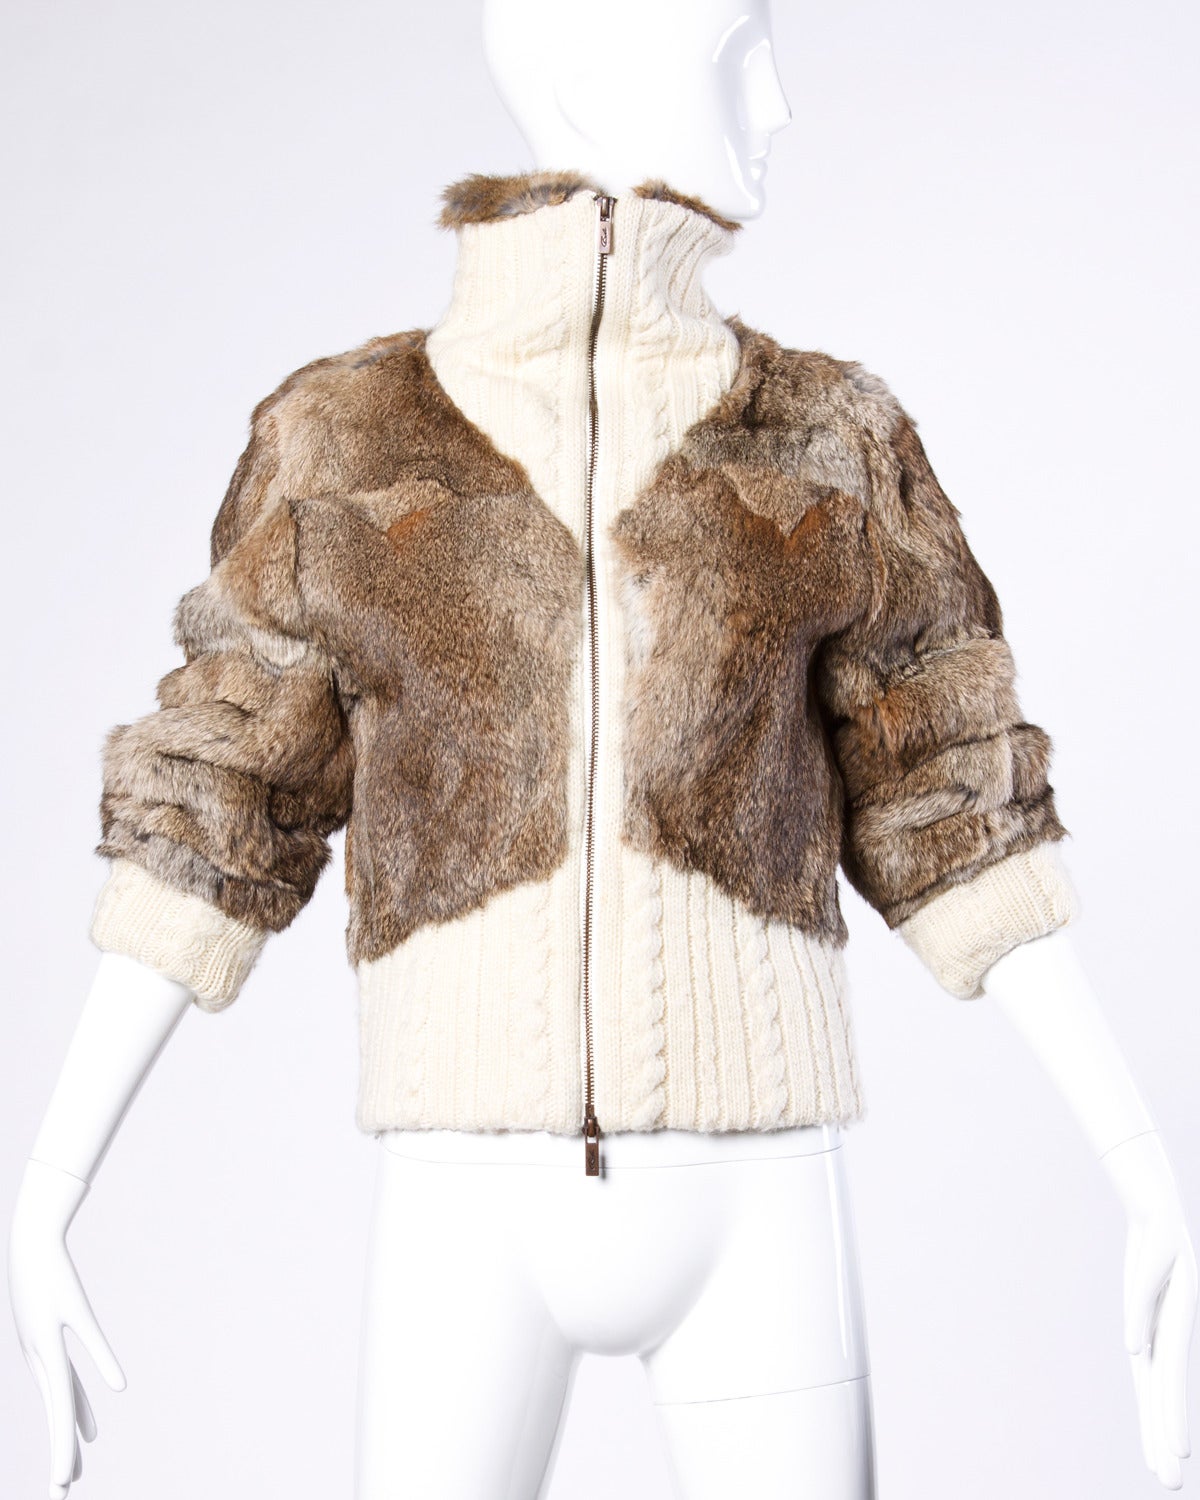 Fantastic brown rabbit fur bomber jacket with ivory knit cuffs and trip. Zip up turtleneck collar.

Details:

Fully Lined
Front Metal Zip
Marked Size: Large
Estimated Size: Small-Medium
Color: Ivory/ Brown/ Black
Fabric: Wool Blend/ Rabbit